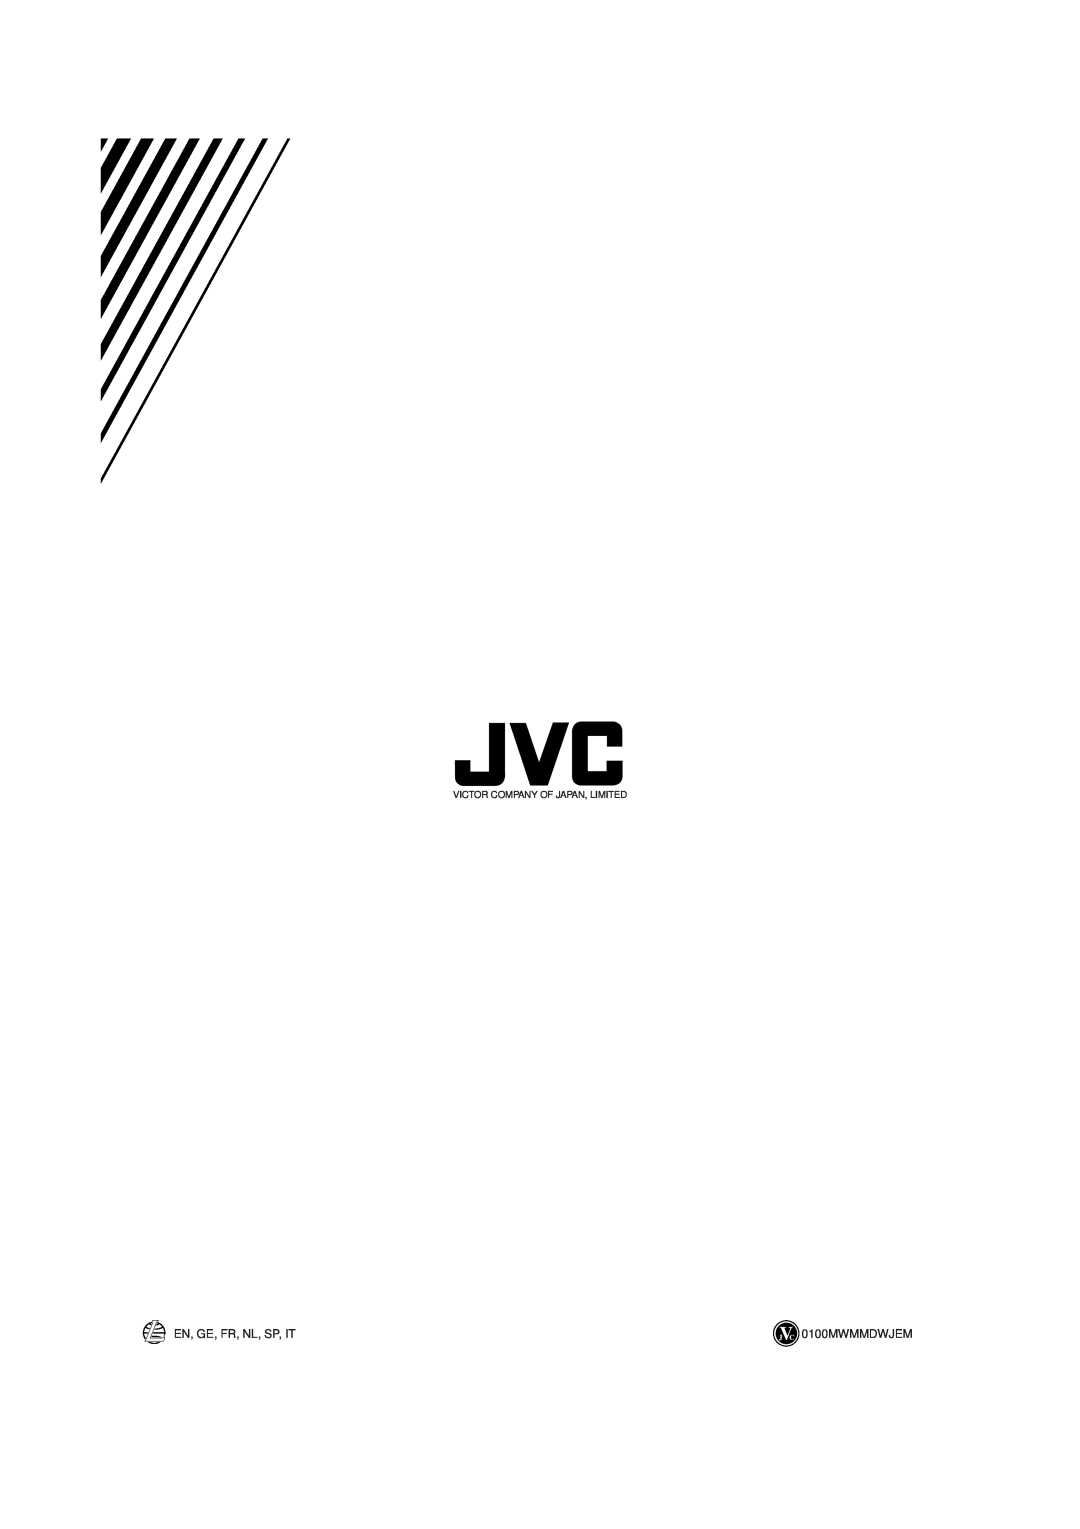 JVC UX-V10, UX-V20R manual En, Ge, Fr, Nl, Sp, It, 0100MWMMDWJEM, Victor Company Of Japan, Limited 